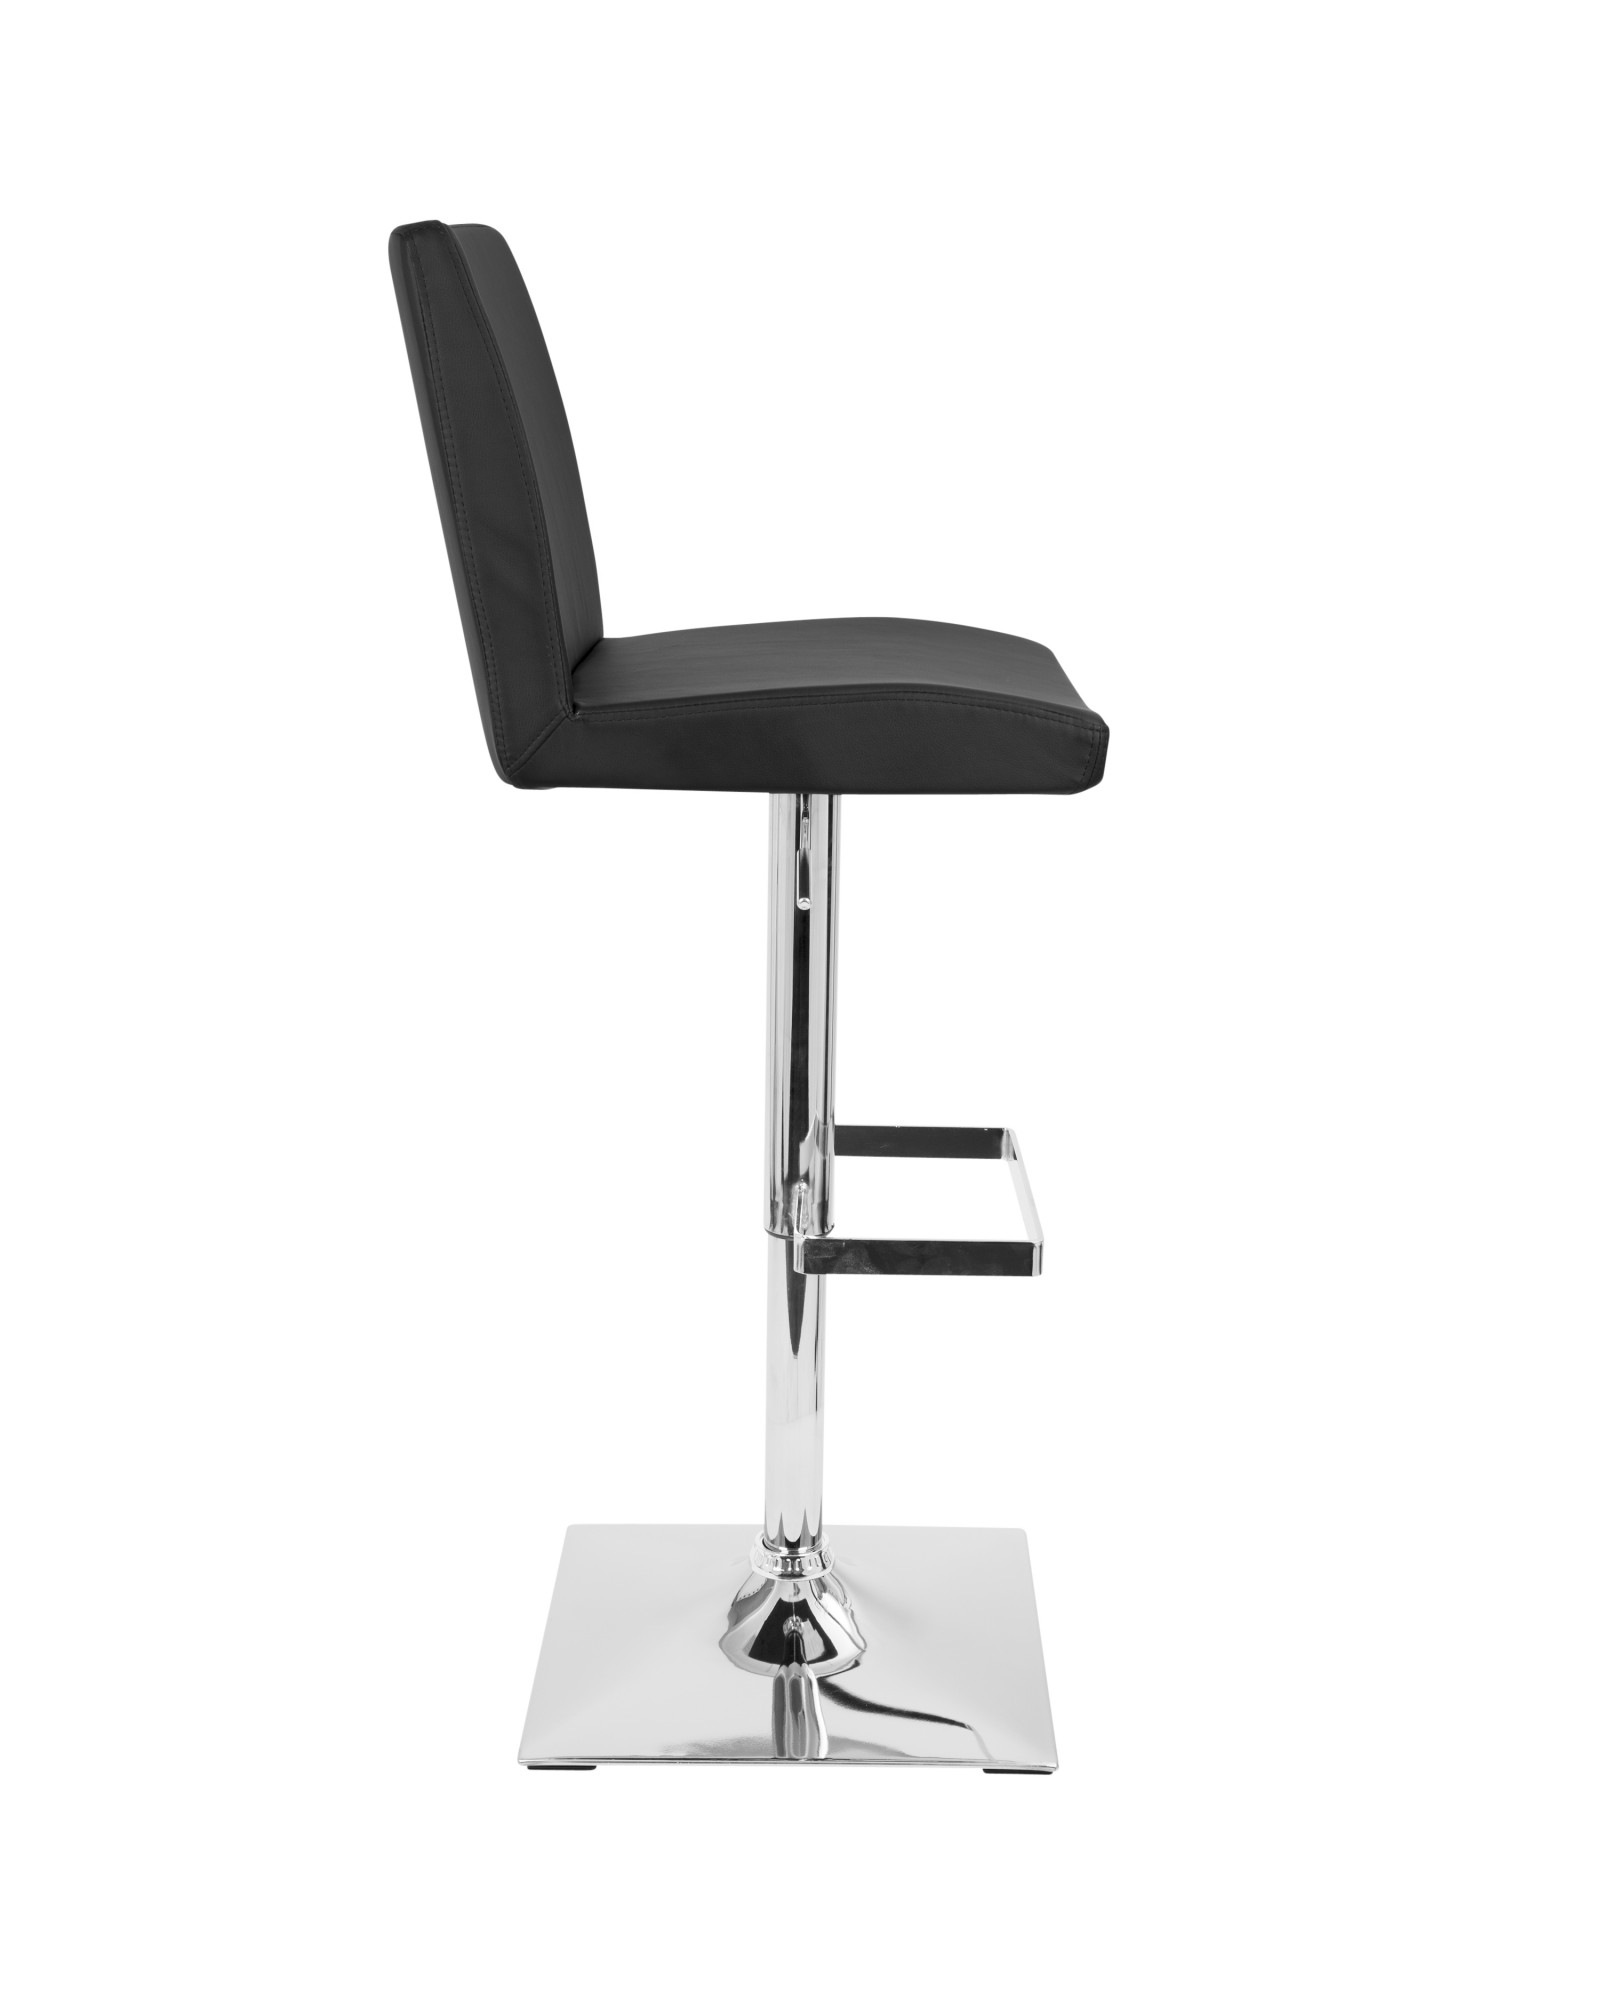 Captain Contemporary Adjustable Barstool with Swivel in Black Faux Leather